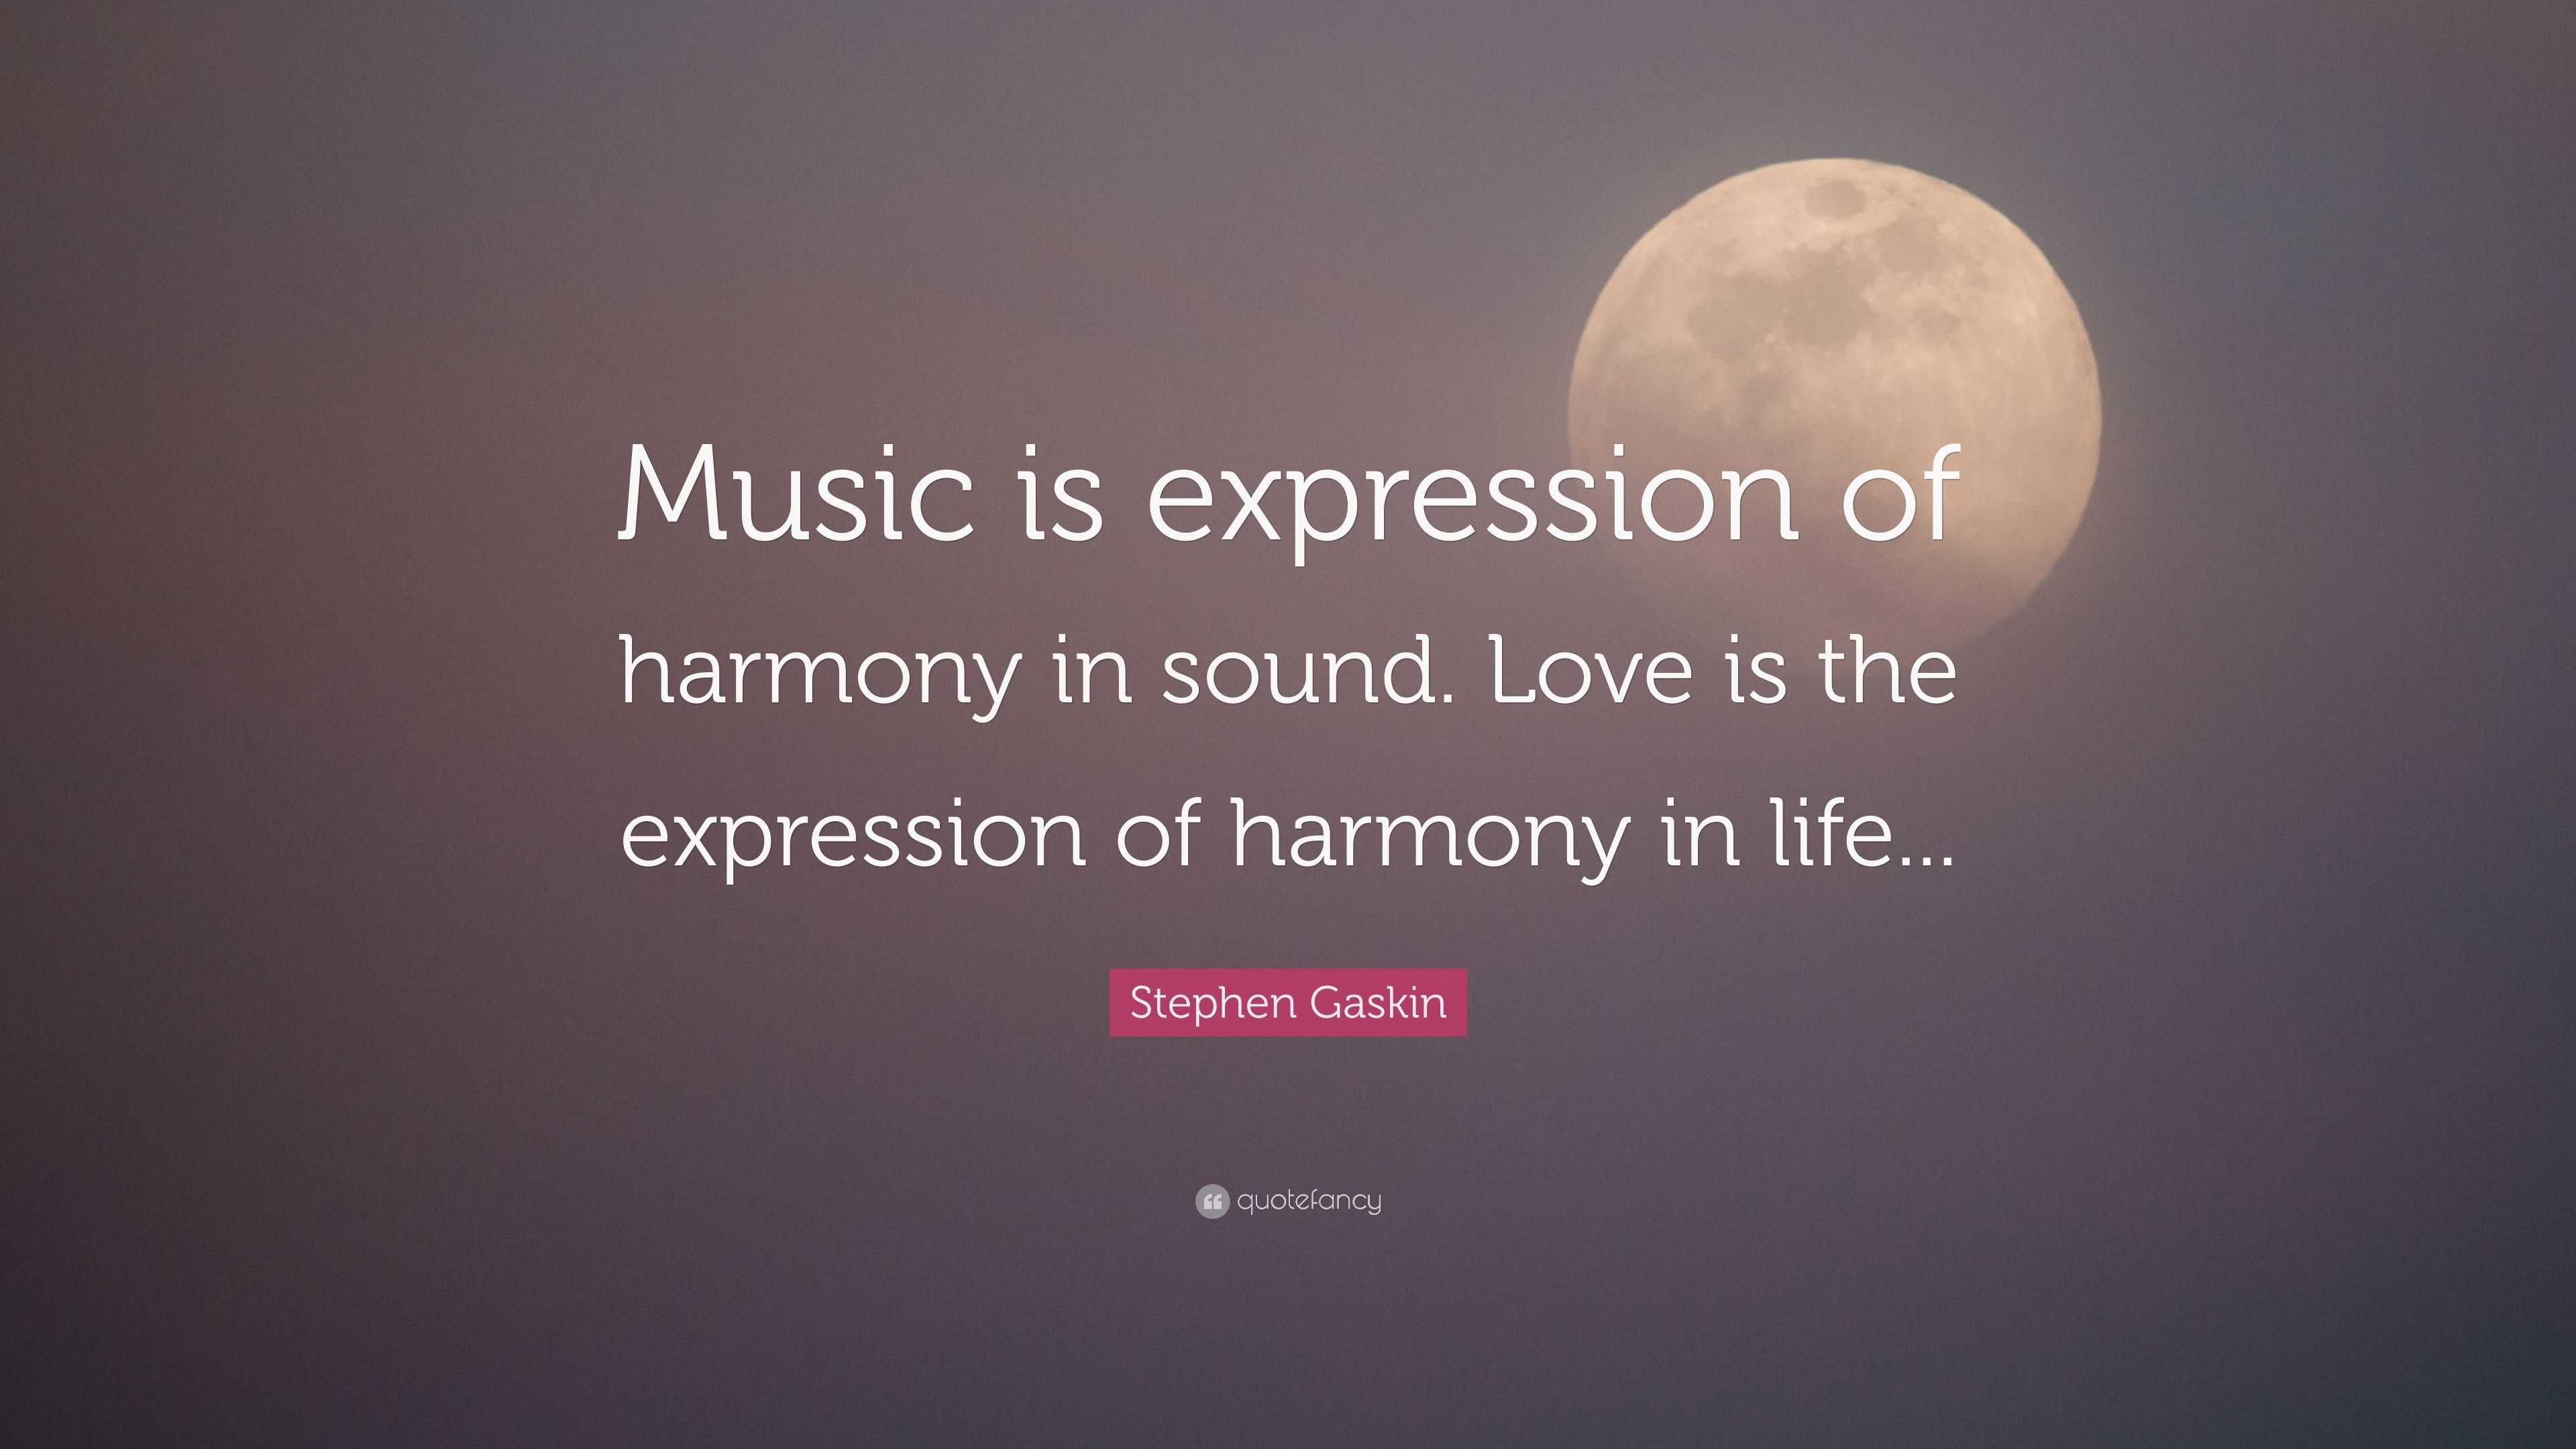 Stephen Gaskin Quote: “Music is expression of harmony in sound. Love is